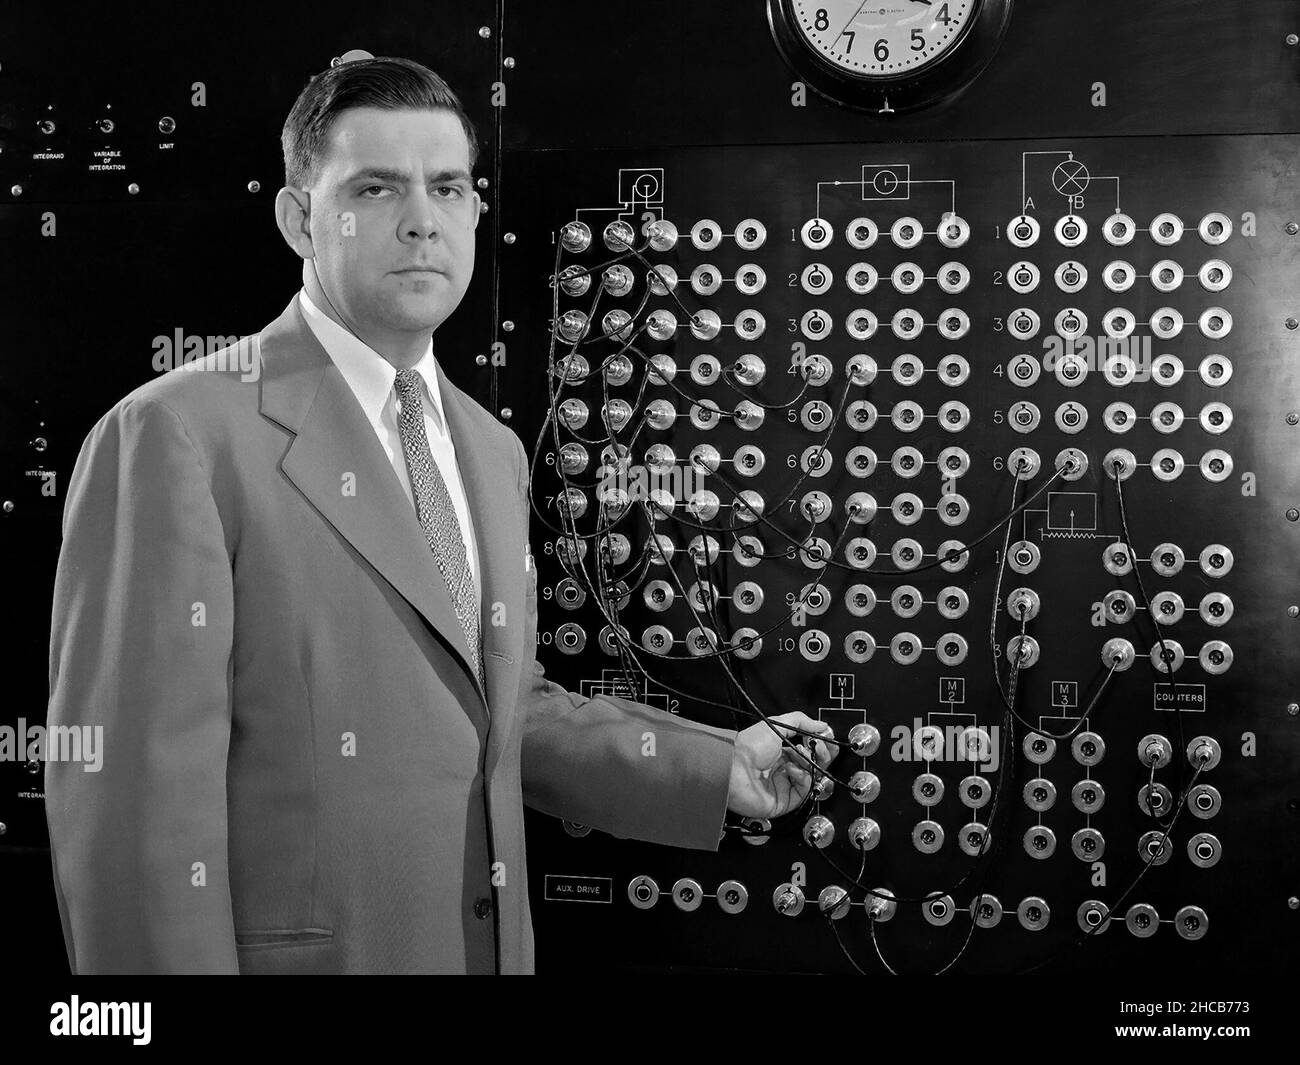 Harry Mergler stands at the control board of a differential analyzer in the new Instrument Research Laboratory at the National Advisory Committee for Aeronautics (NACA) Lewis Flight Propulsion Laboratory. The differential analyzer was a multi-variable analog computation machine devised in 1931 by Massachusetts Institute of Technology researcher and future NACA Committee member Vannevar Bush. The mechanical device could solve computations up to the sixth order, but had to be rewired before each new computation. Mergler modified Bush’s differential analyzer in the late 1940s to calculate droplet Stock Photo